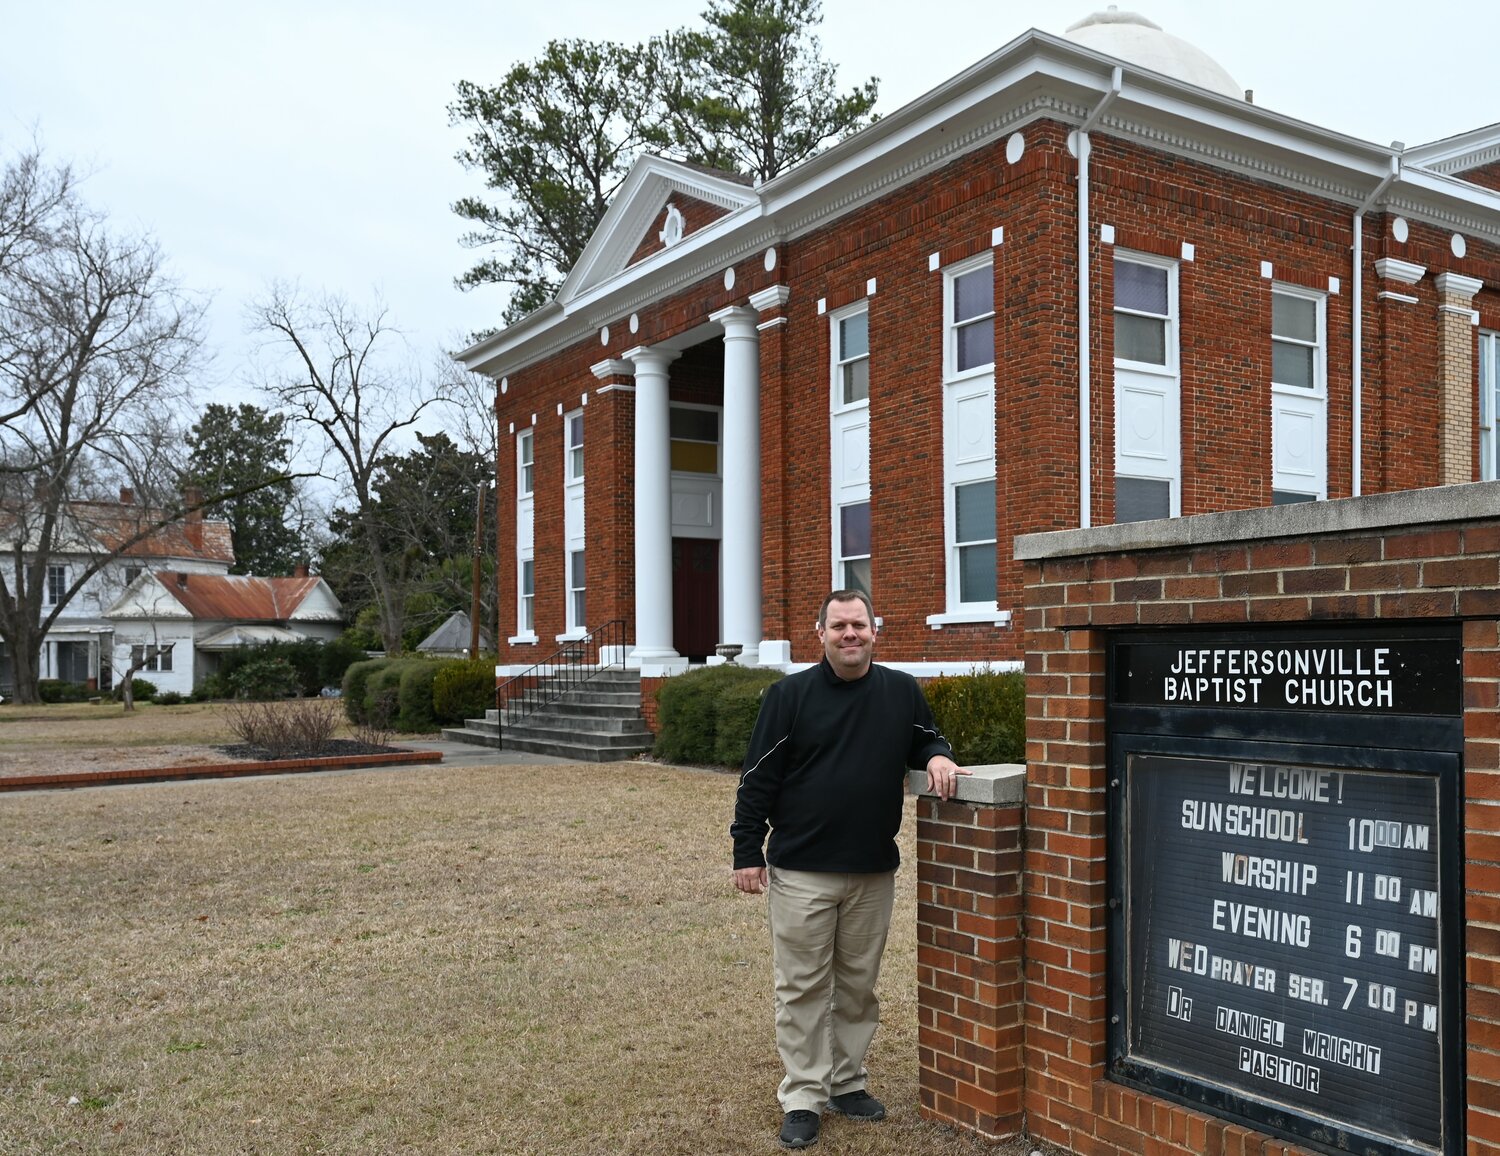 Pastor Dan Wright stands outside Jeffersonville Baptist Church, which is celebrating its 175th anniversary this year. (Index/Roger Alford)